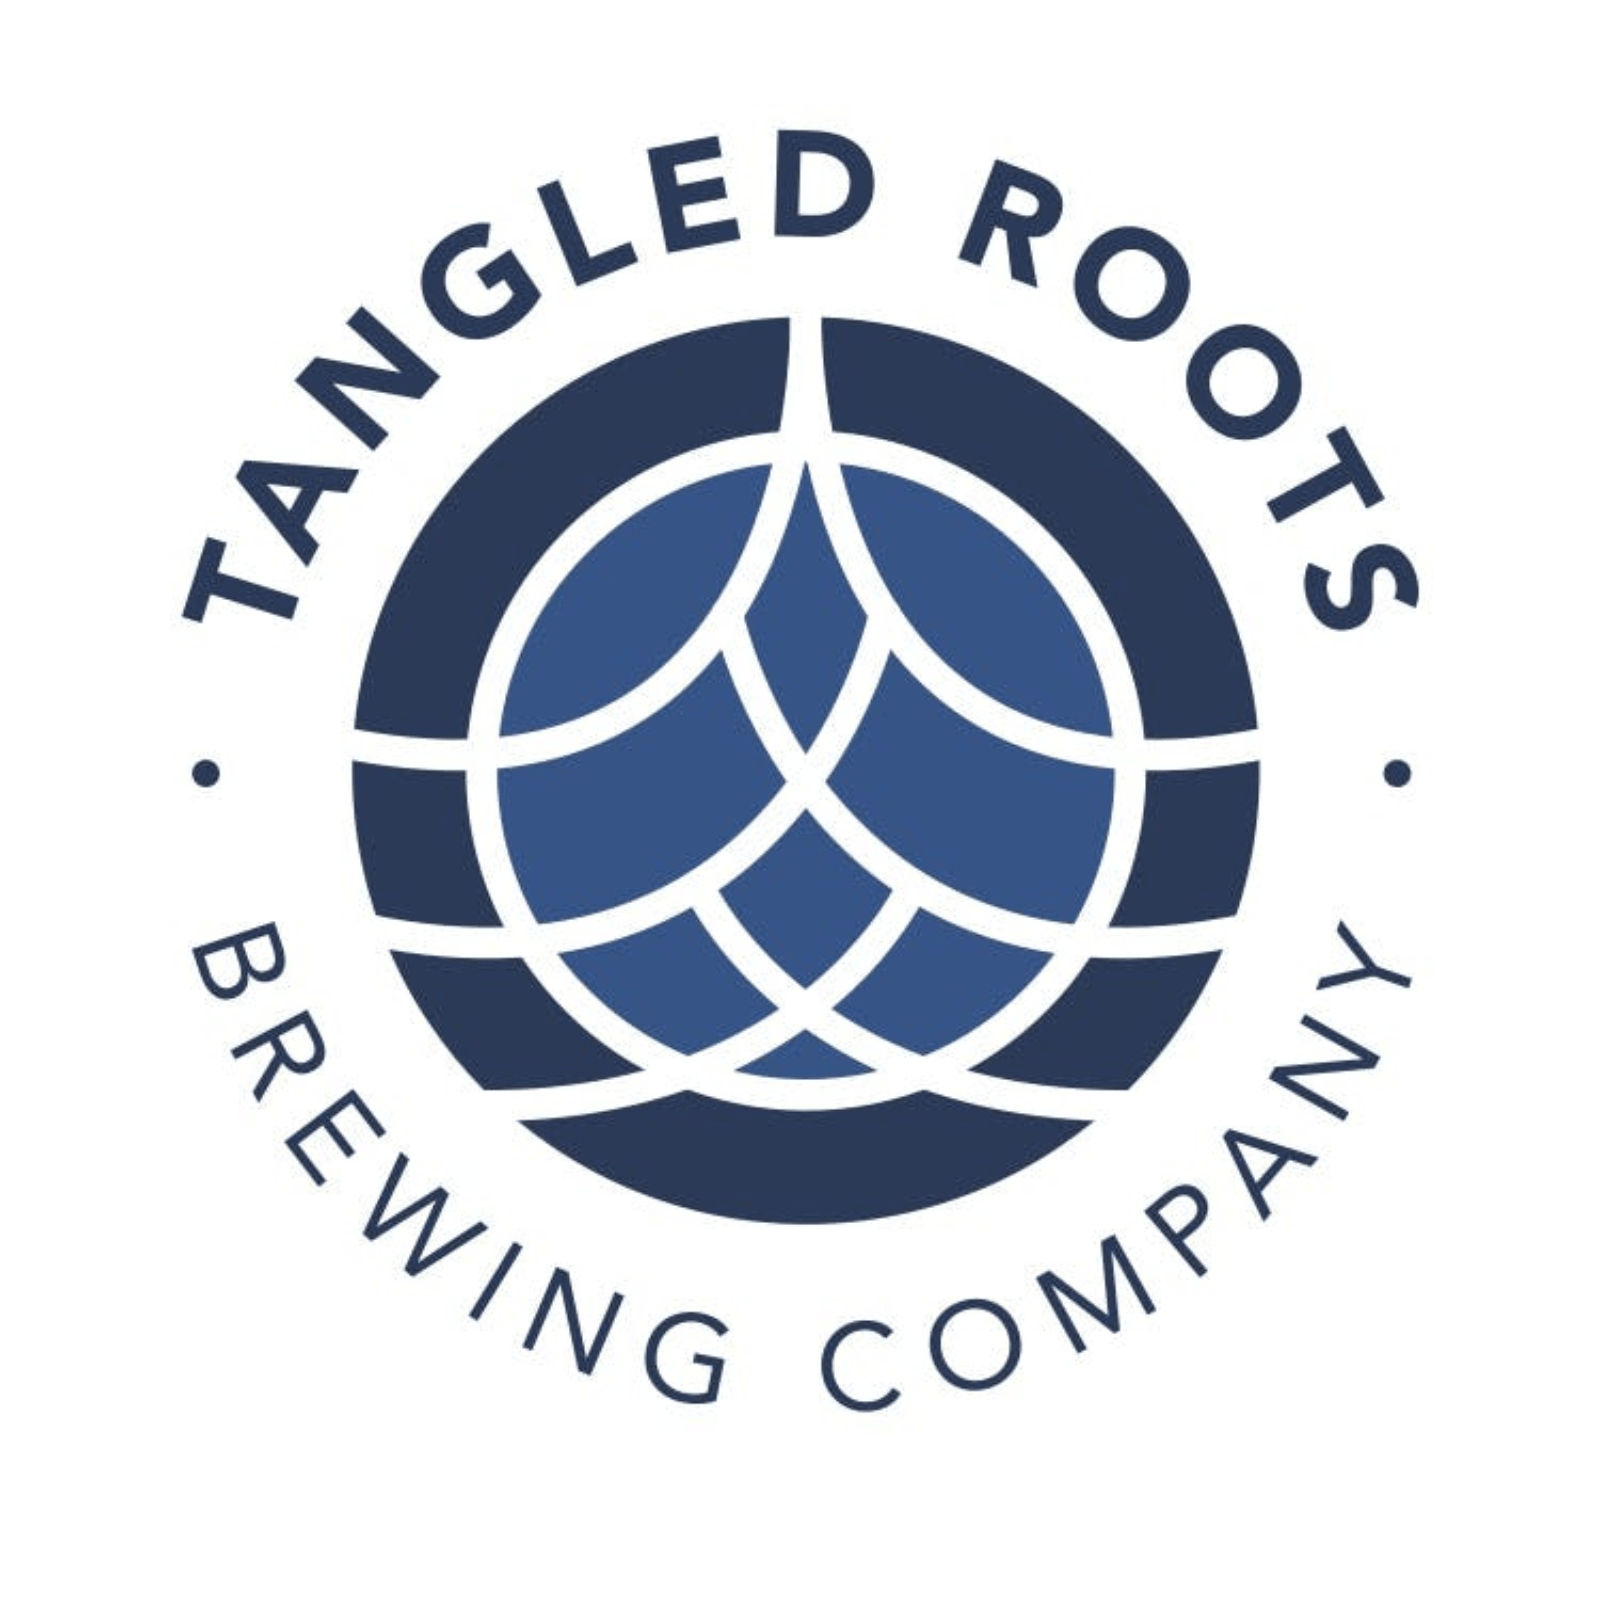 Tangled Roots Brewing Company Logo